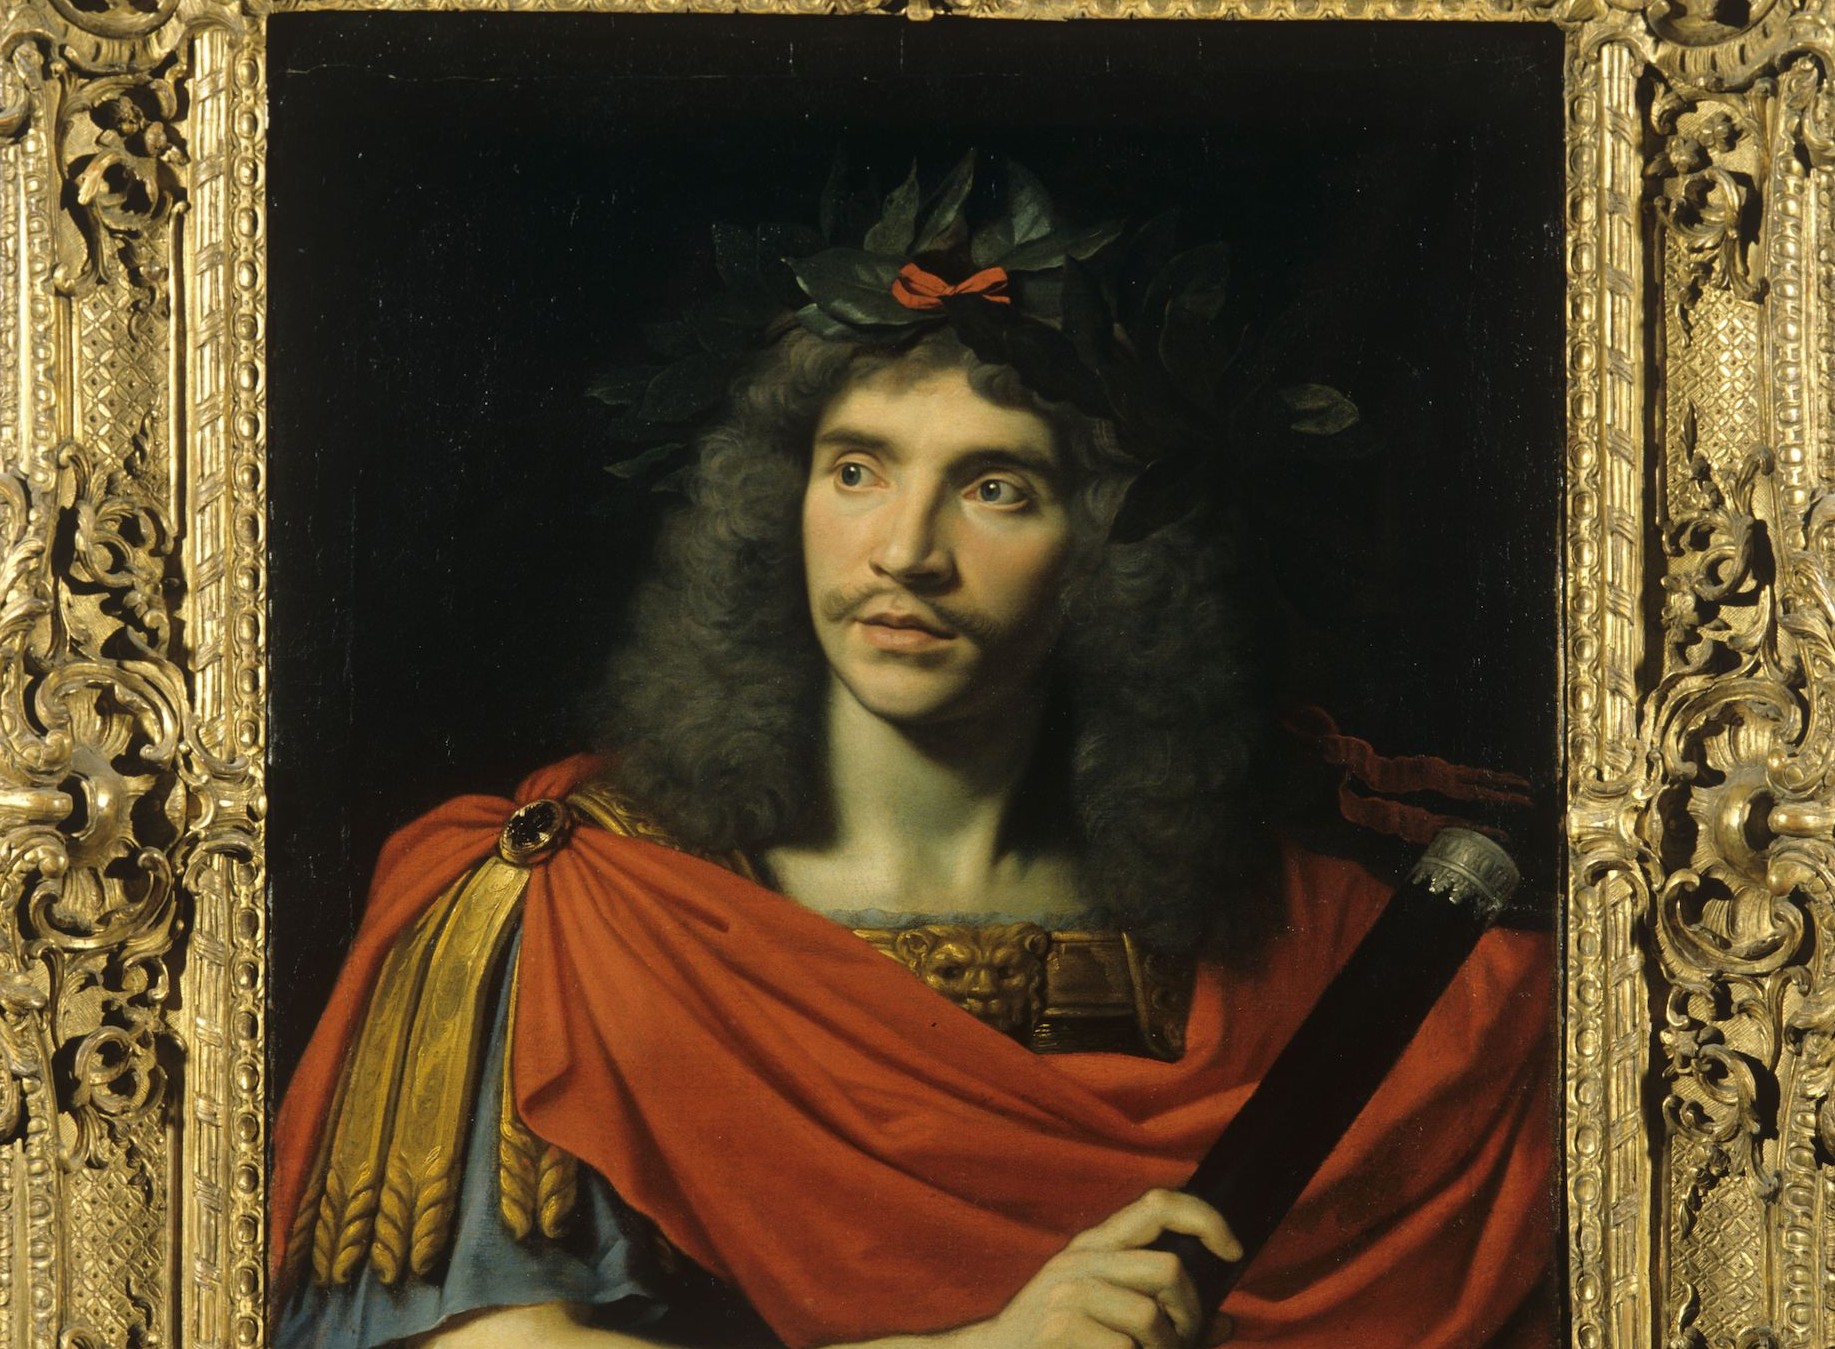 The truth about MoliÃ¨re